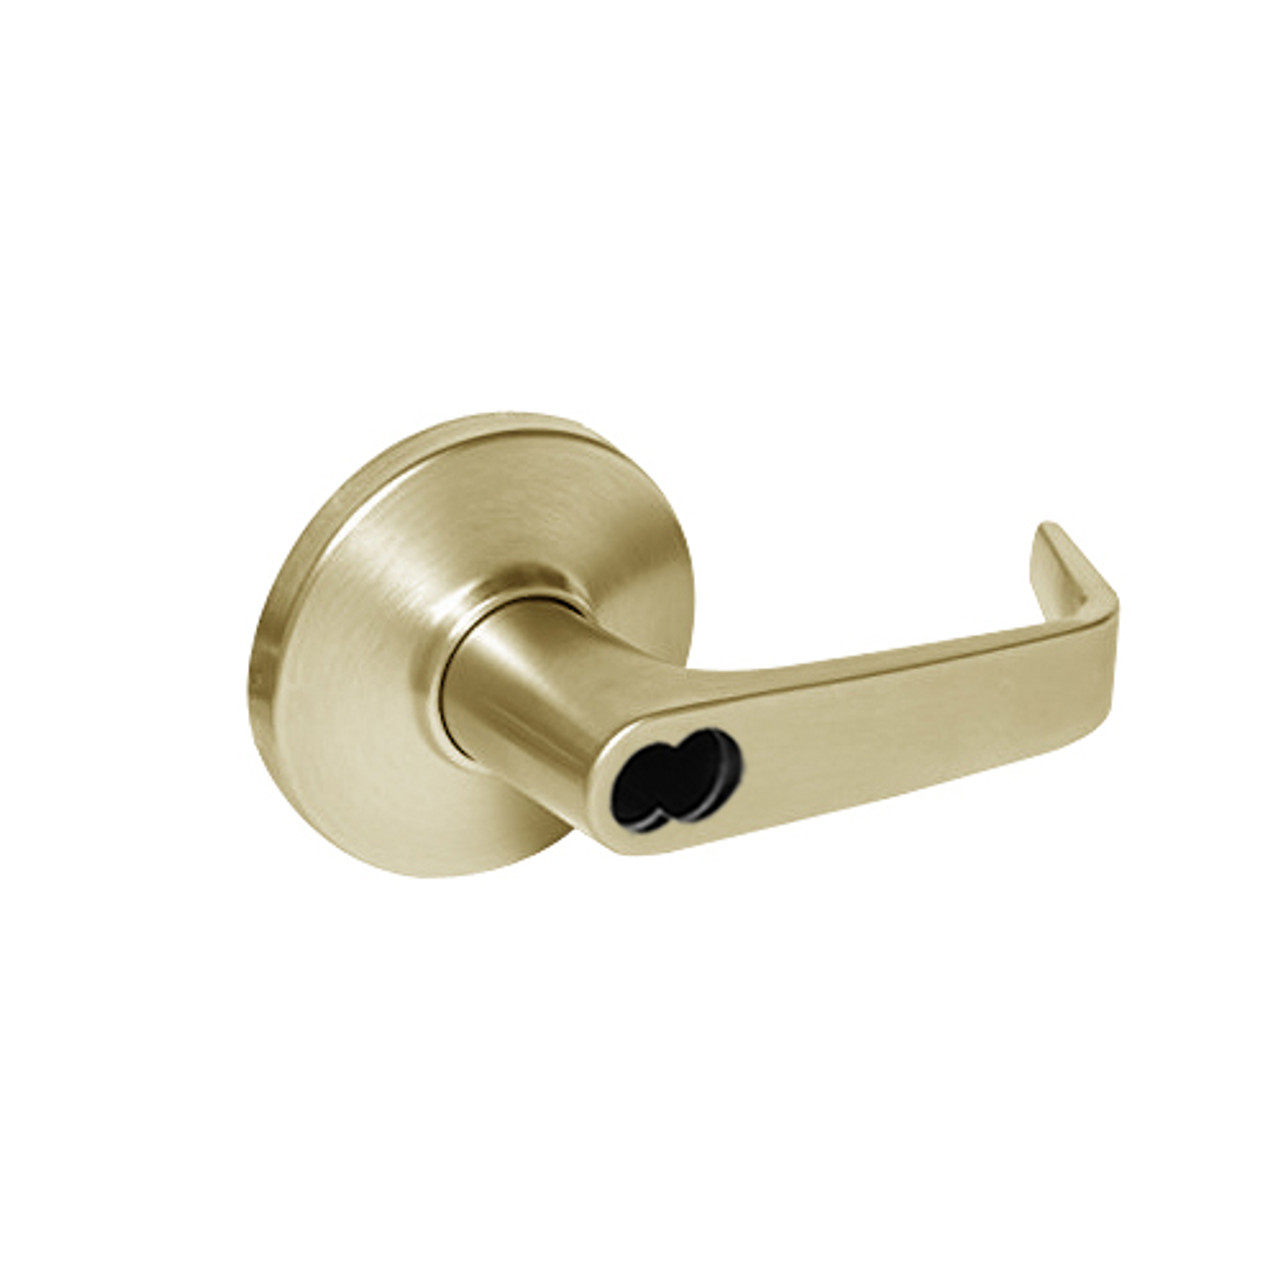 9K37E15DS3606 Best 9K Series Service Station Cylindrical Lever Locks with Contour Angle with Return Lever Design Accept 7 Pin Best Core in Satin Brass